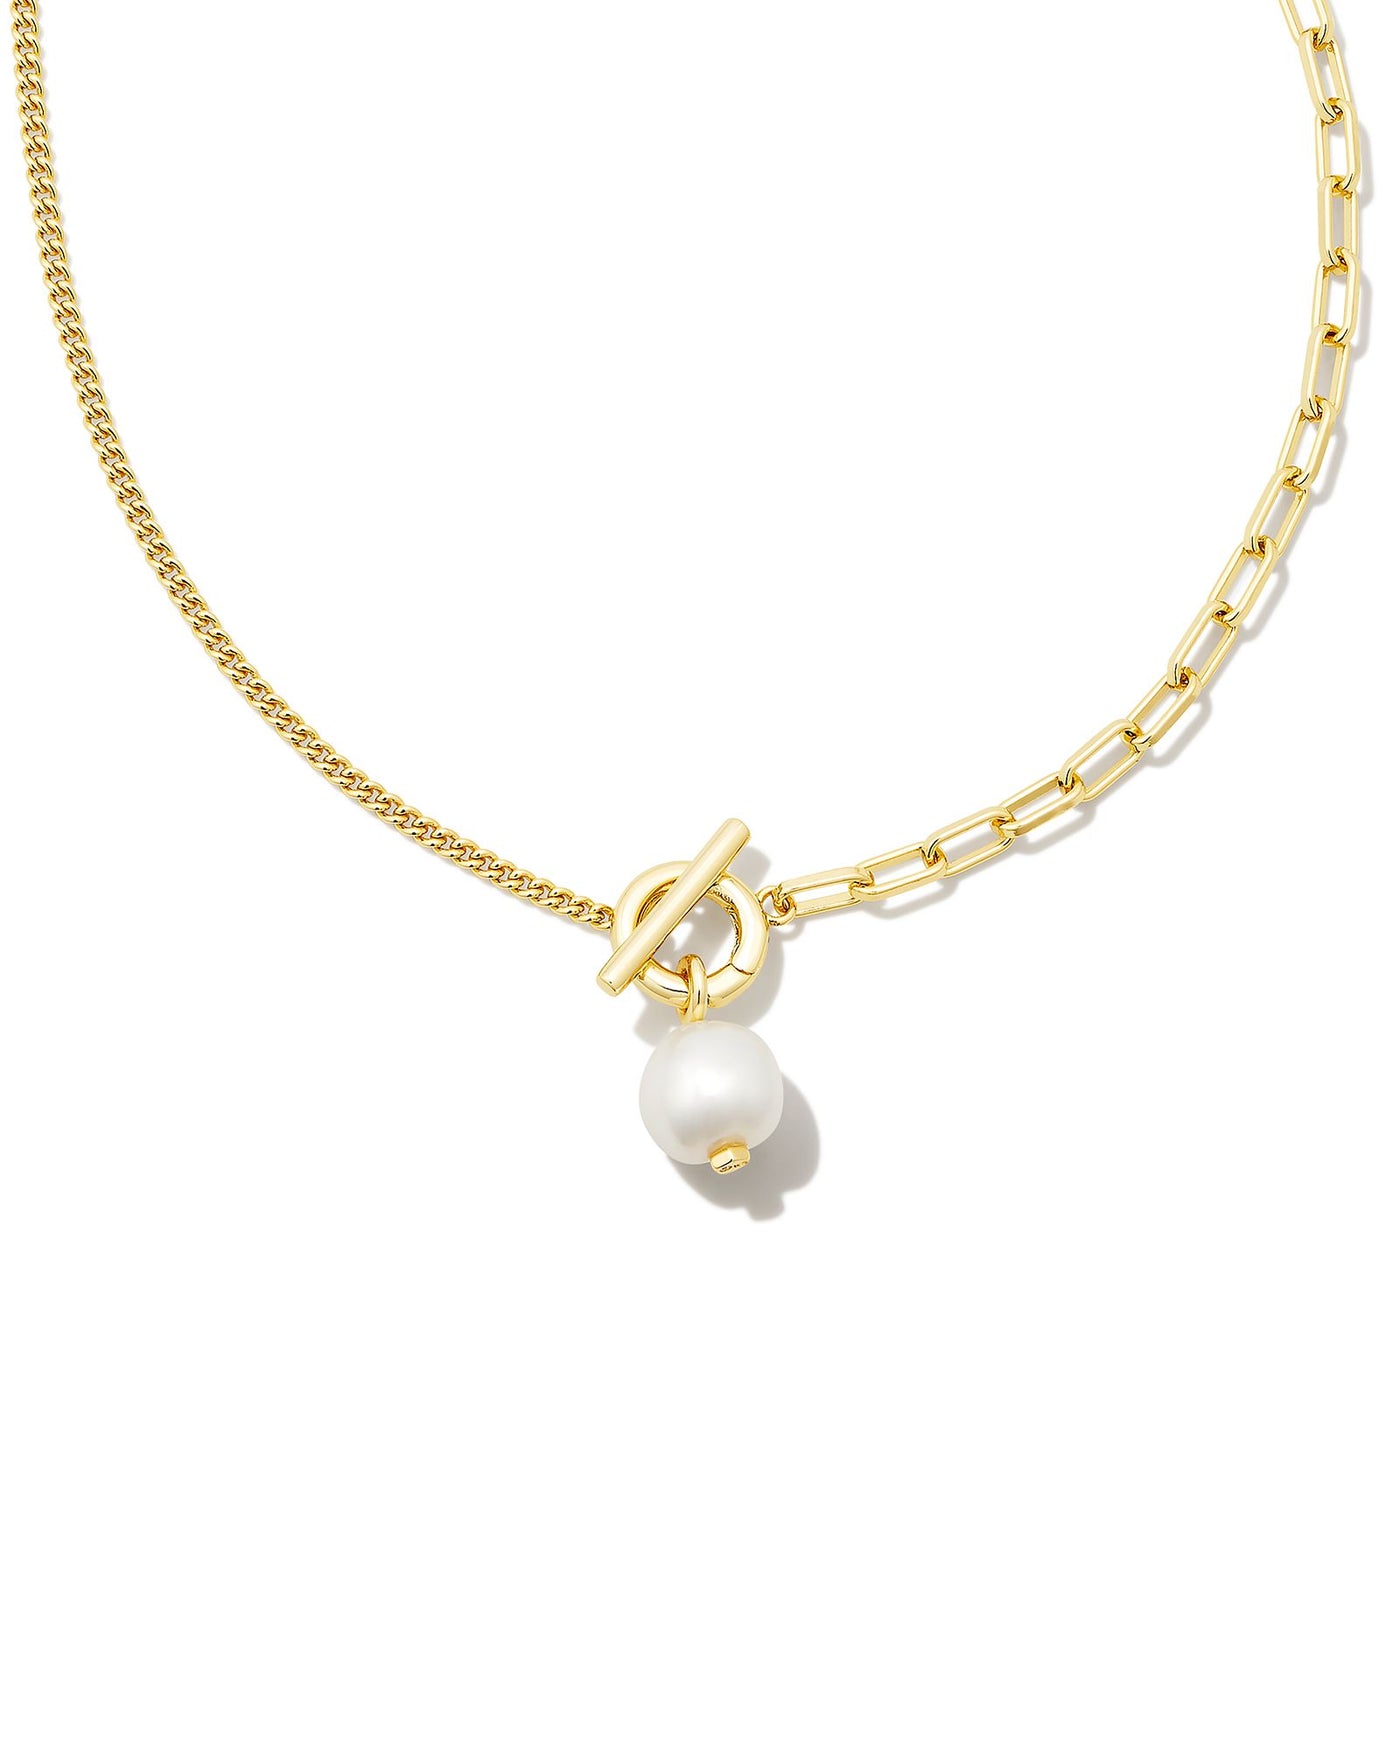 Kendra Scott Leighton Pearl Chain Necklace Gold White Pearl-Necklaces-Kendra Scott-Market Street Nest, Fashionable Clothing, Shoes and Home Décor Located in Mabank, TX